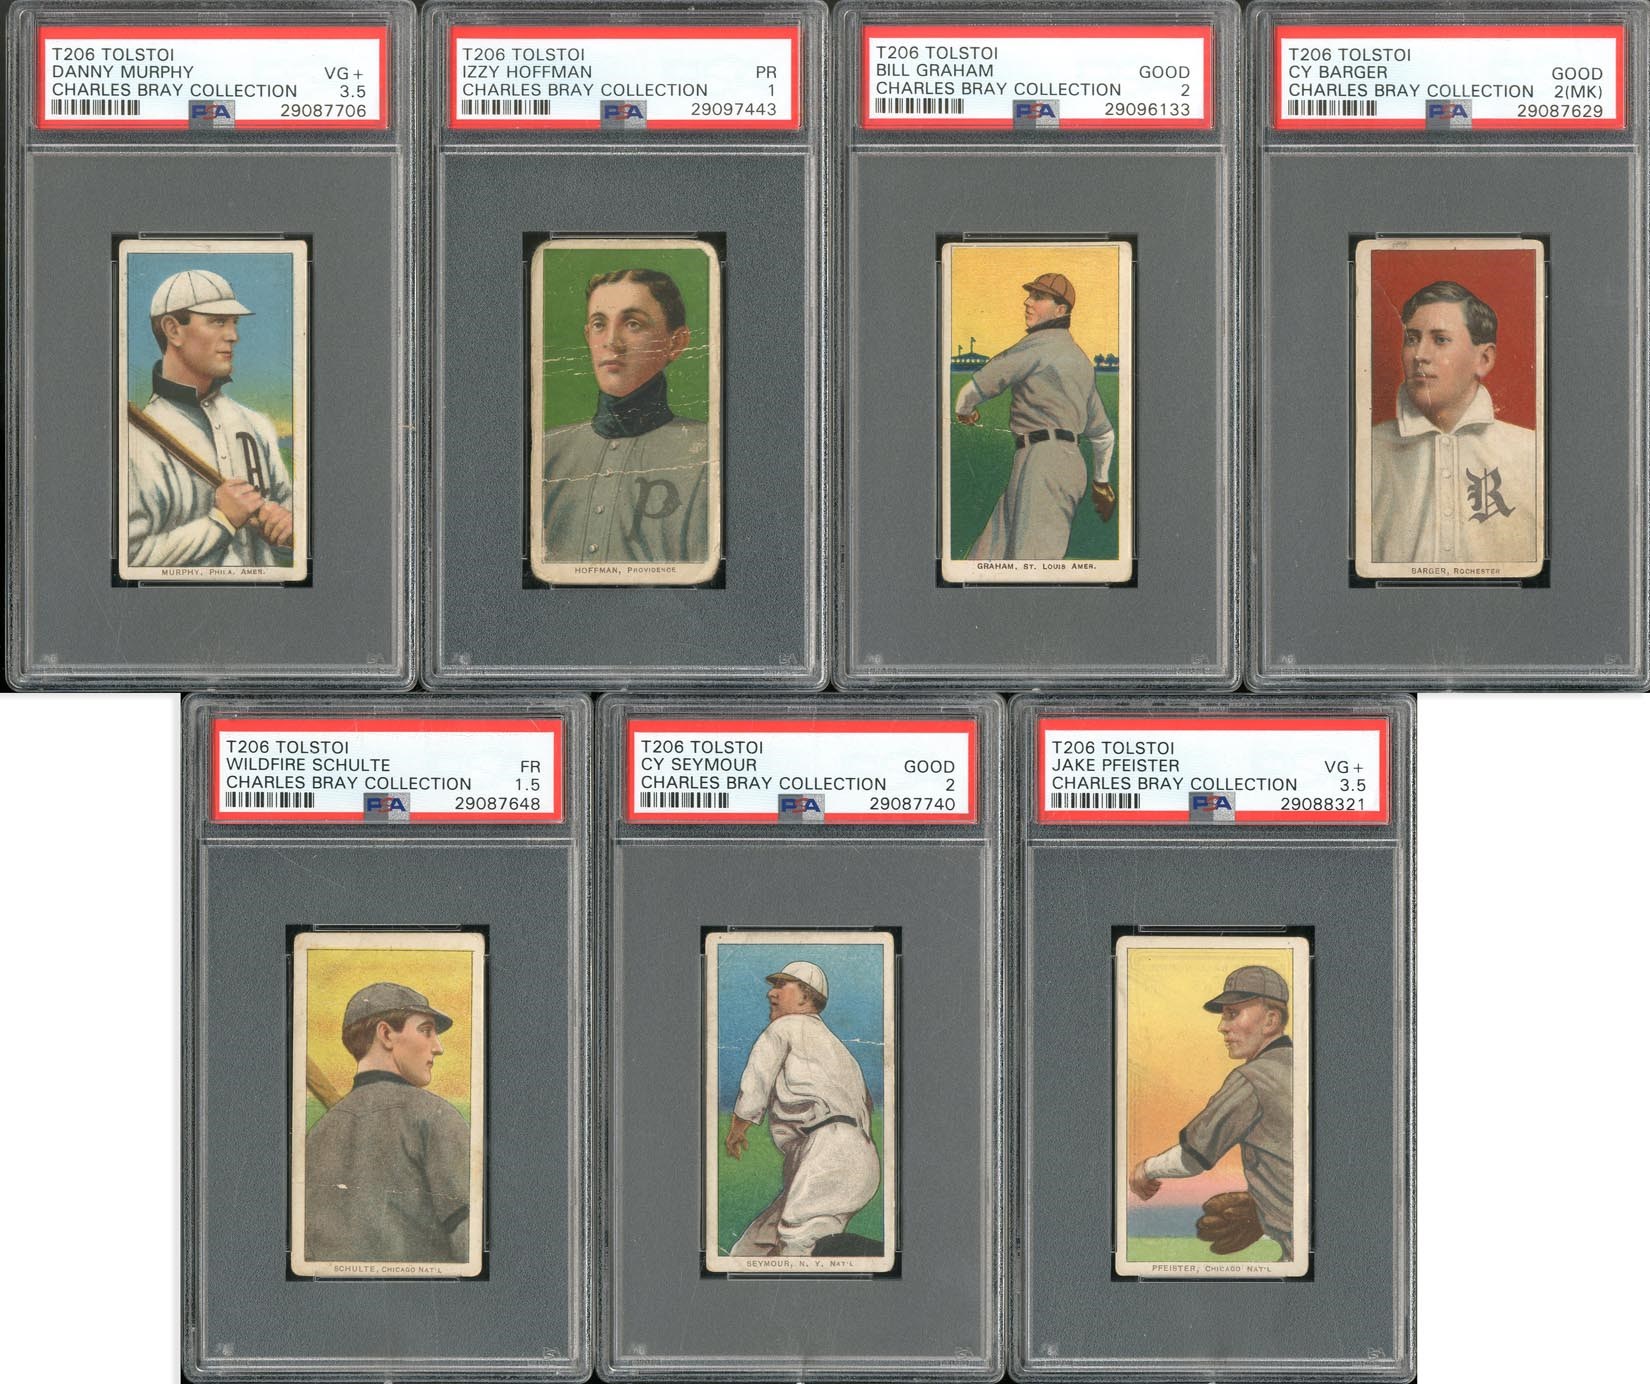 - T206 Tolstoi Rare Back Lot (7) - The Charles Bray Collection